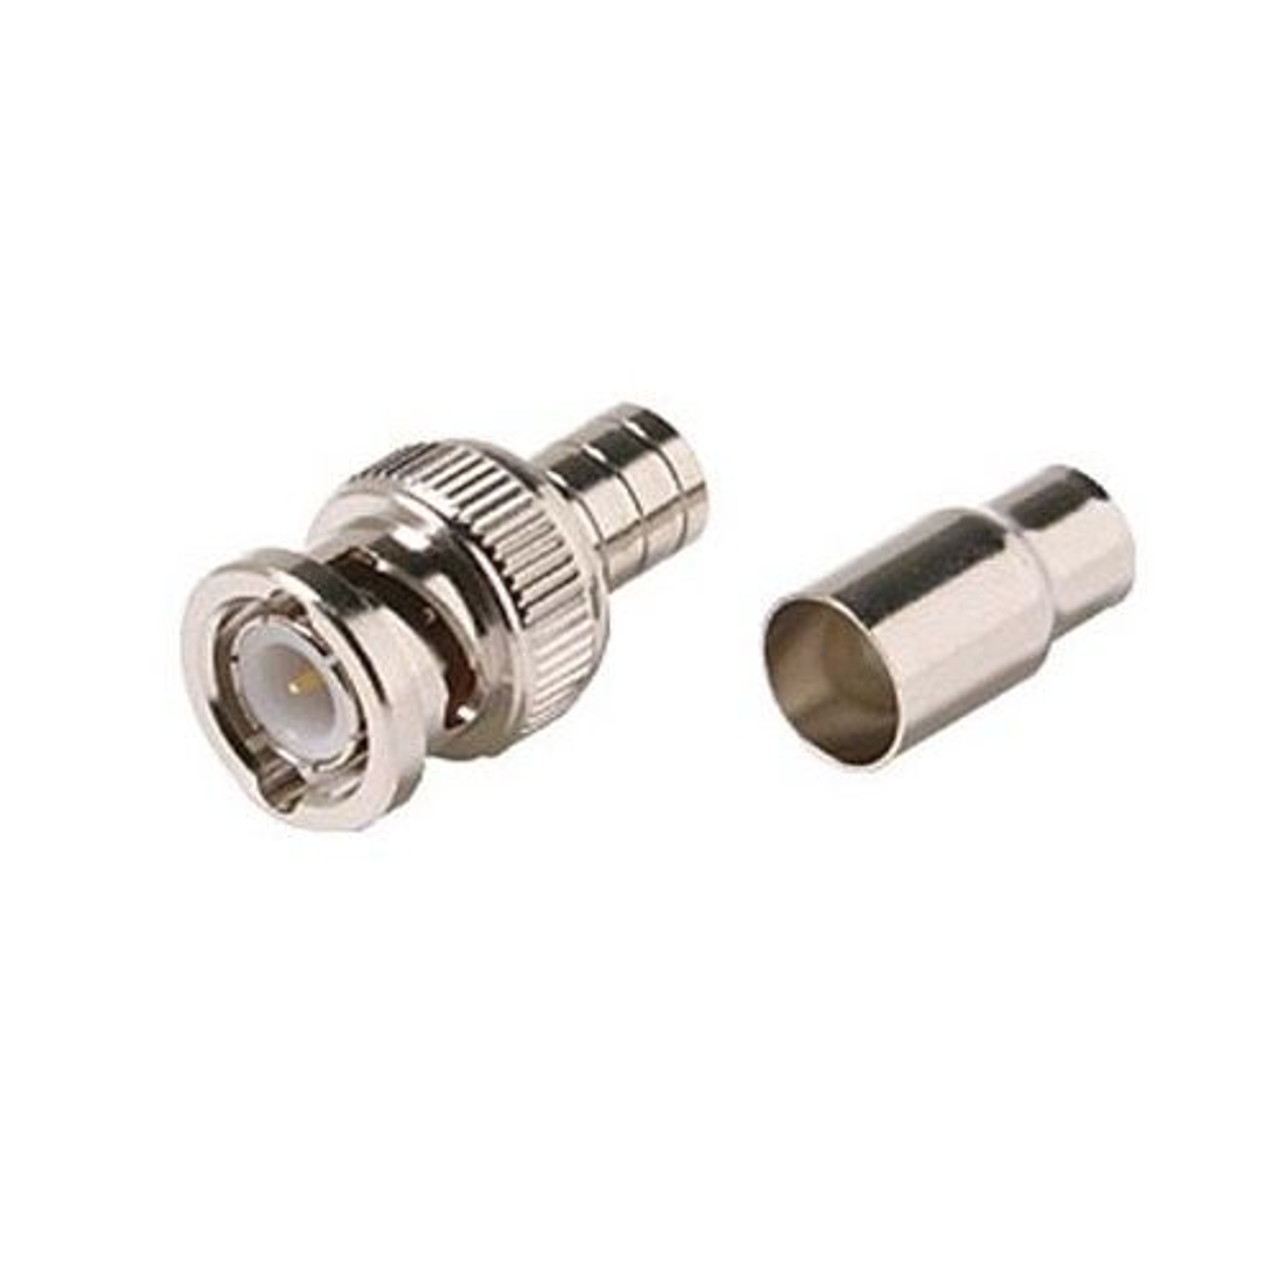 Eagle BNC Male Connector Crimp on RG6 Coaxial 2 Piece Connector Nickel Plate Brass Plug Commercial Grade Male Plug Adapter Crimp-On BNC to RG-6 Converter